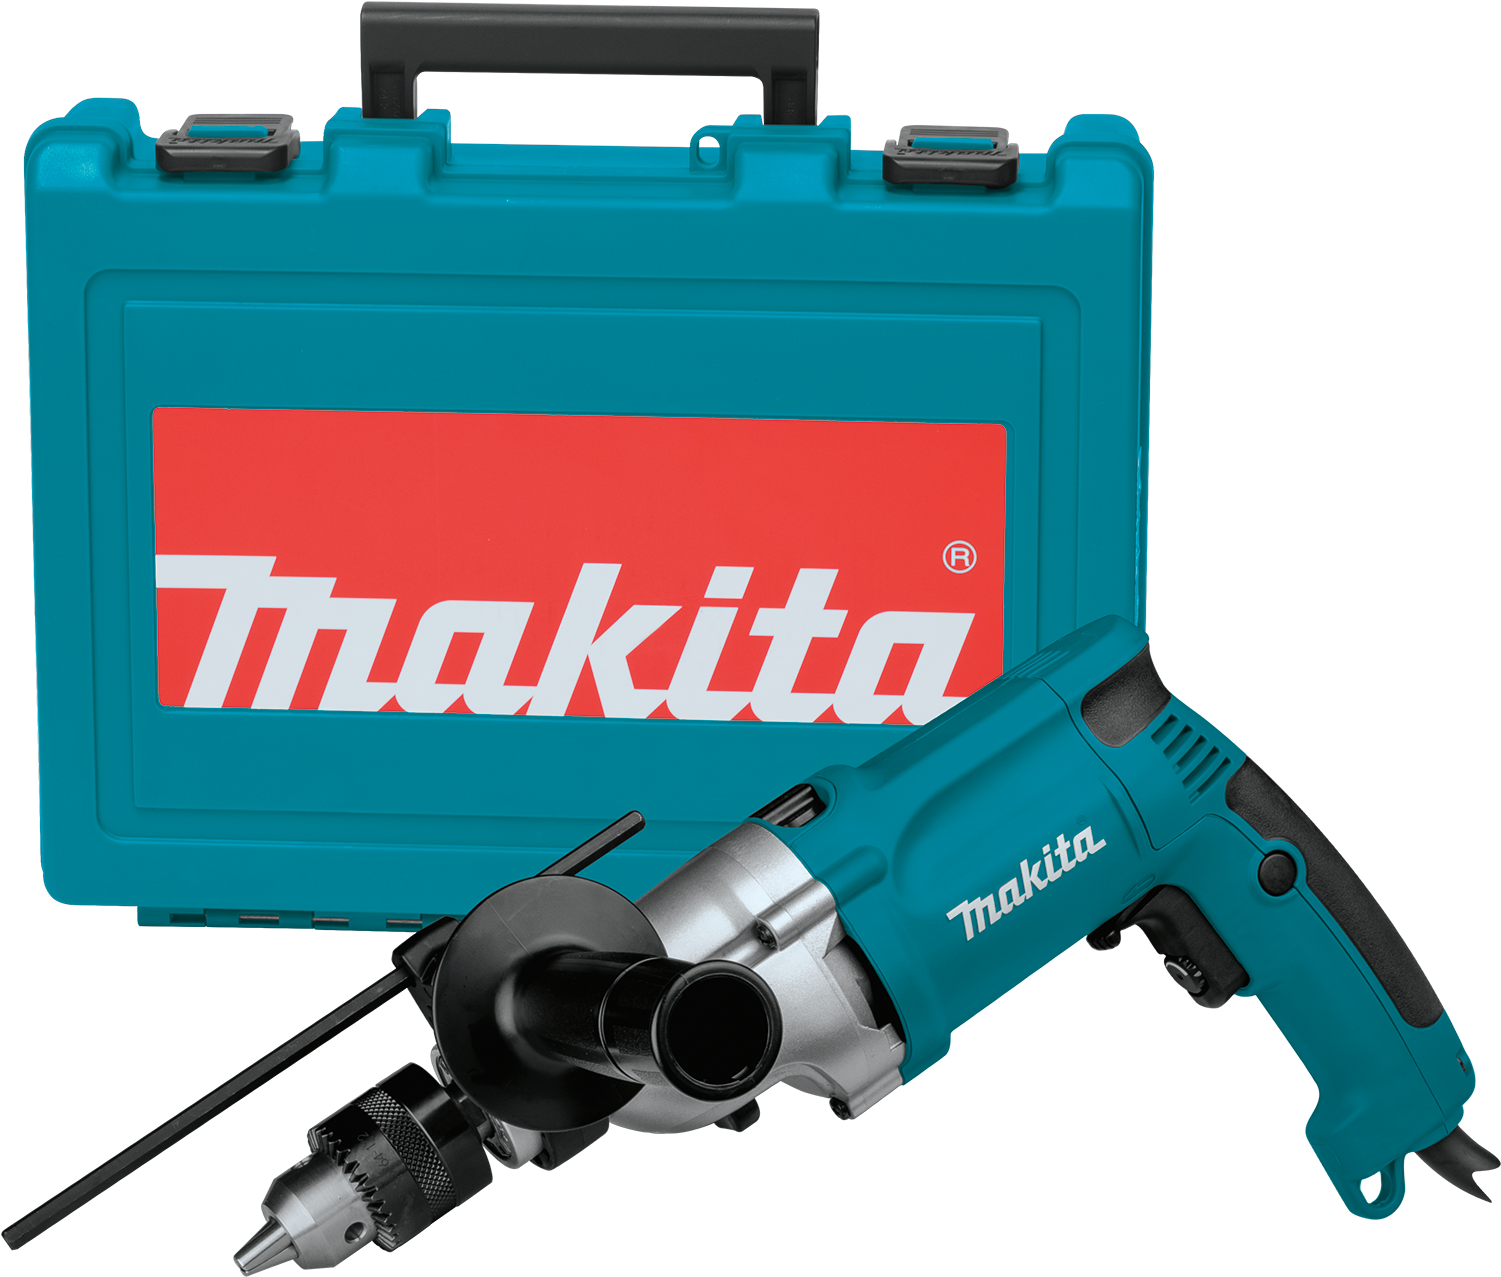 Makita Electric Drillwith Case PNG